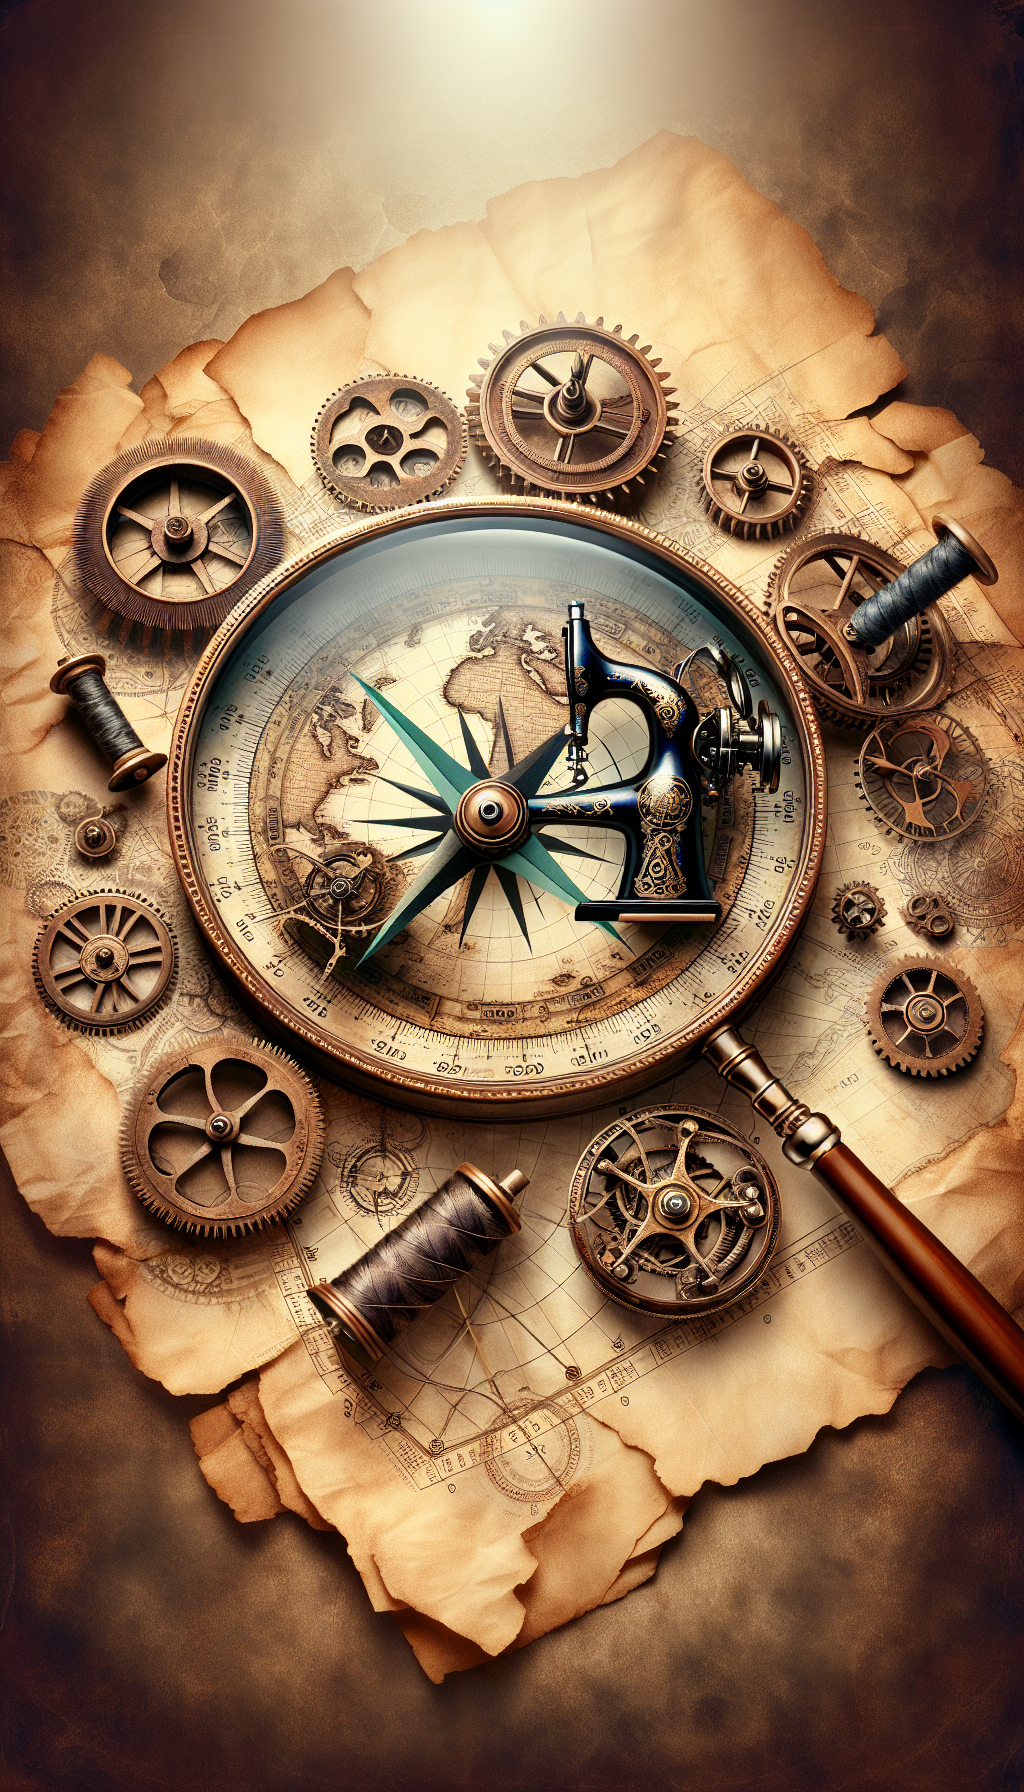 An intricate steampunk-style compass rose overlaid on an ancient, delicate parchment, its needle twirling among gear-shaped continents and vintage Singer sewing machines as landmarks. The compass directs toward a magnifying glass that highlights an ornate, price-tagged Singer machine, illustrating the treasure hunt through Singer's historic catalog to discover the antique value of these timeless mechanical marvels.